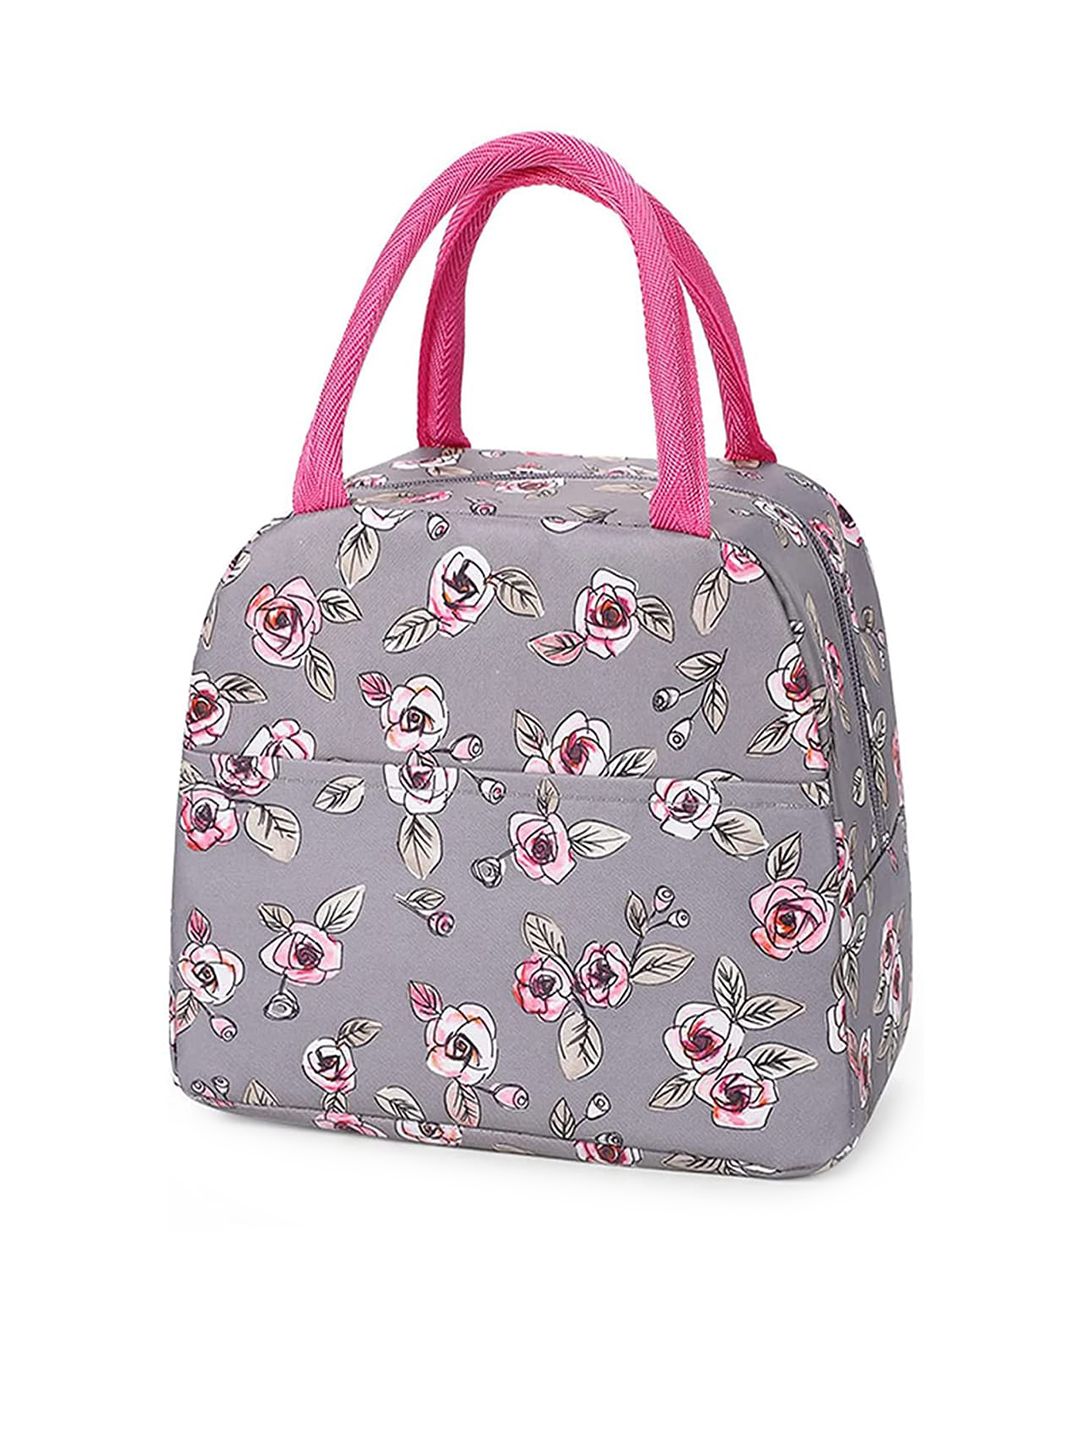 HOUSE OF QUIRK Unisex Grey & Pink Printed Lunch Bag Price in India